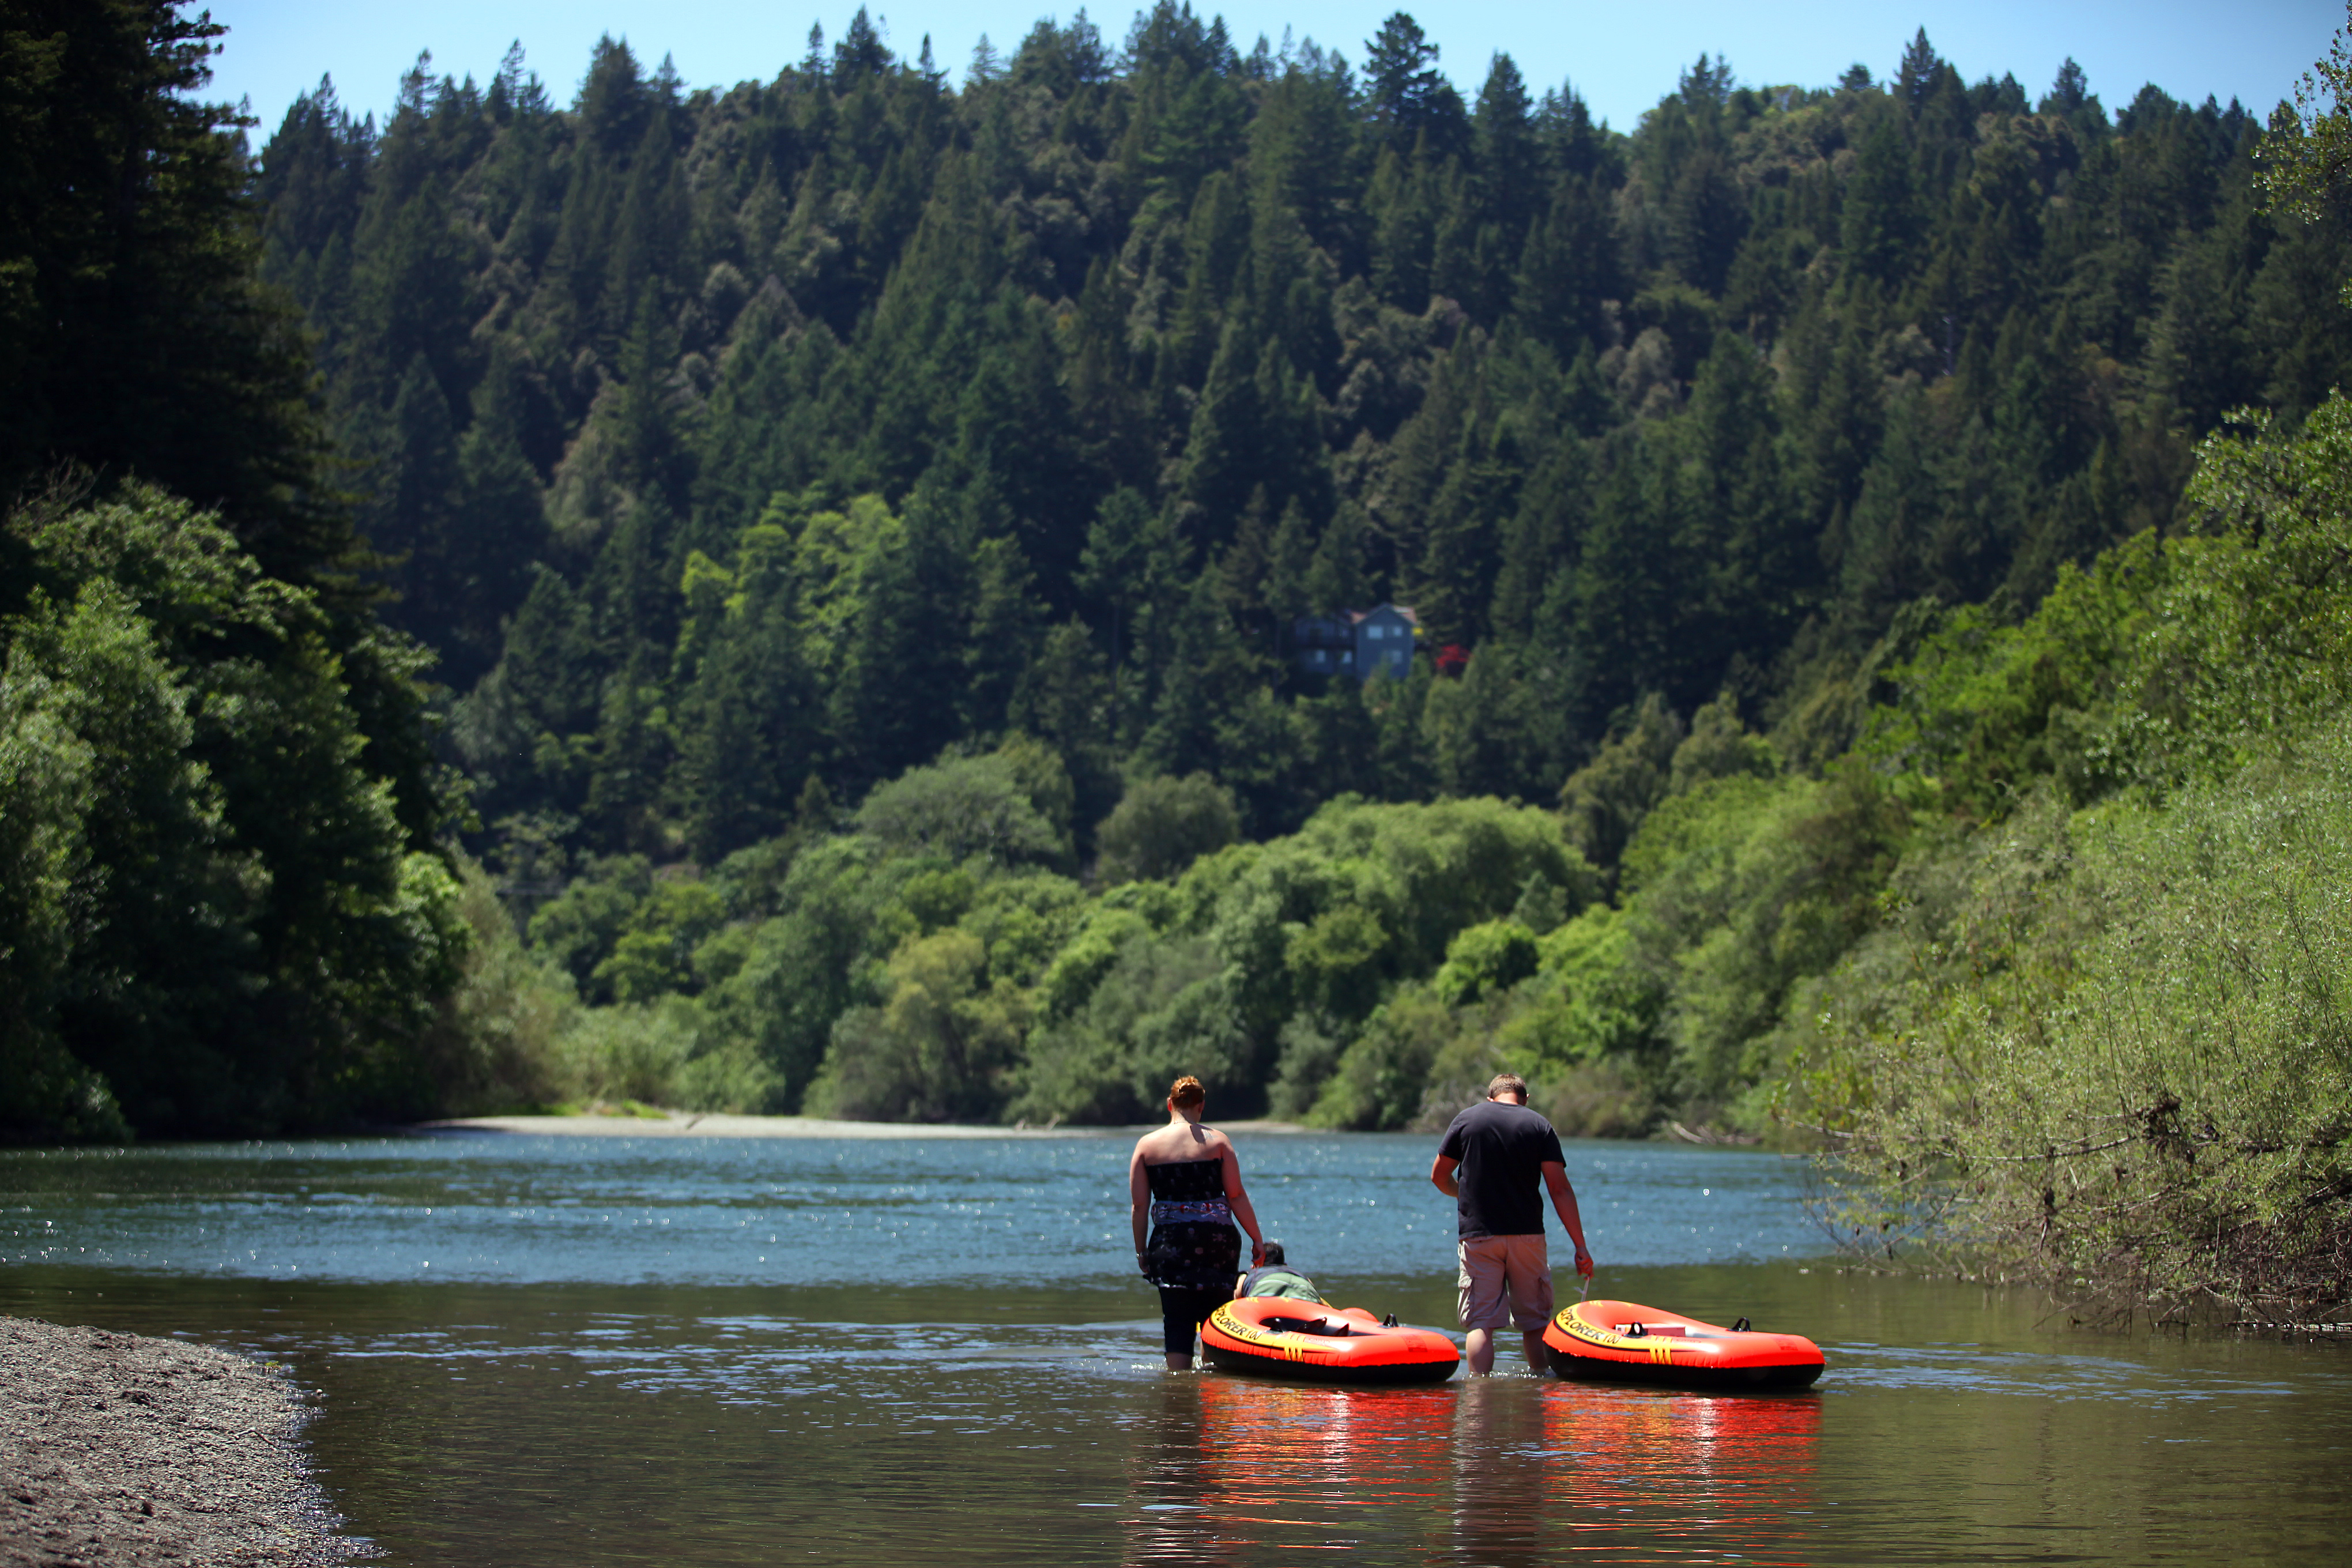 The Russian River in Guerneville, Calif., May 21, 2012. Plenty of traces of Russian expansion during the 19th century remain on the West Coast. (Jim Wilson / The New York Times)